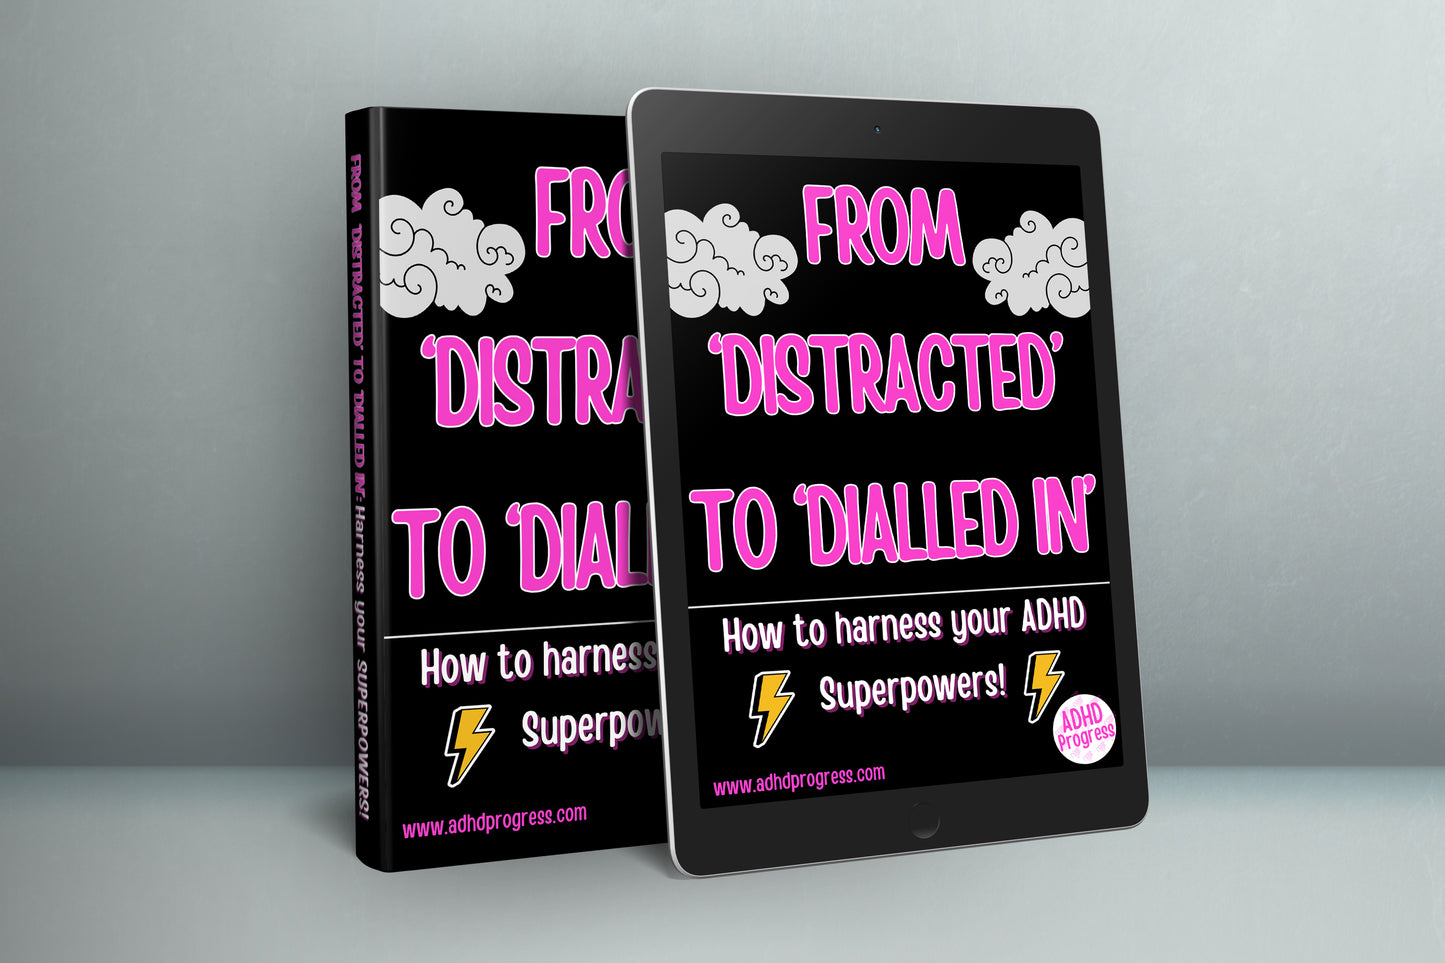 From 'Distracted' to 'Dialled In': How to Harness Your ADHD Superpowers! 🚀💡📘